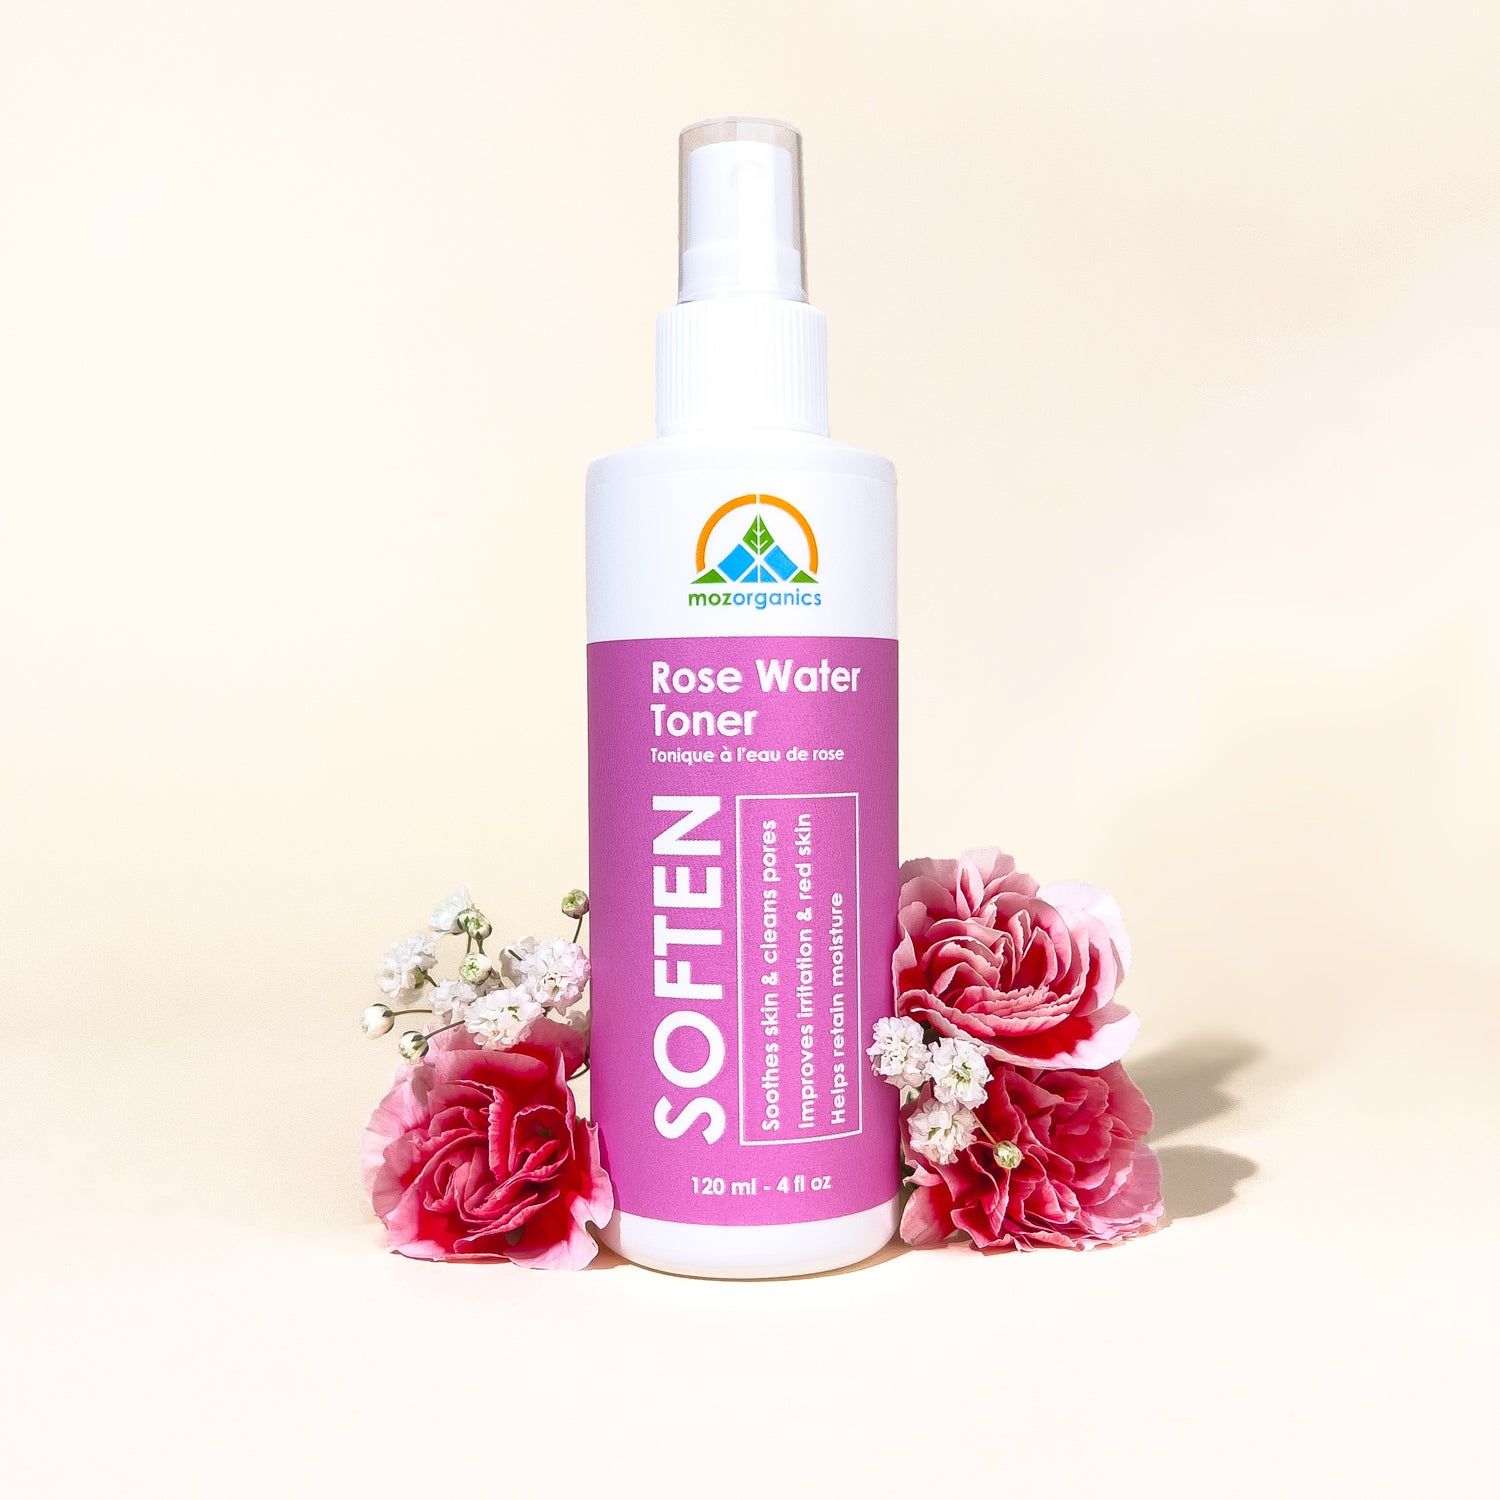 Organic rose water toner: best facial spray for redness and irritation